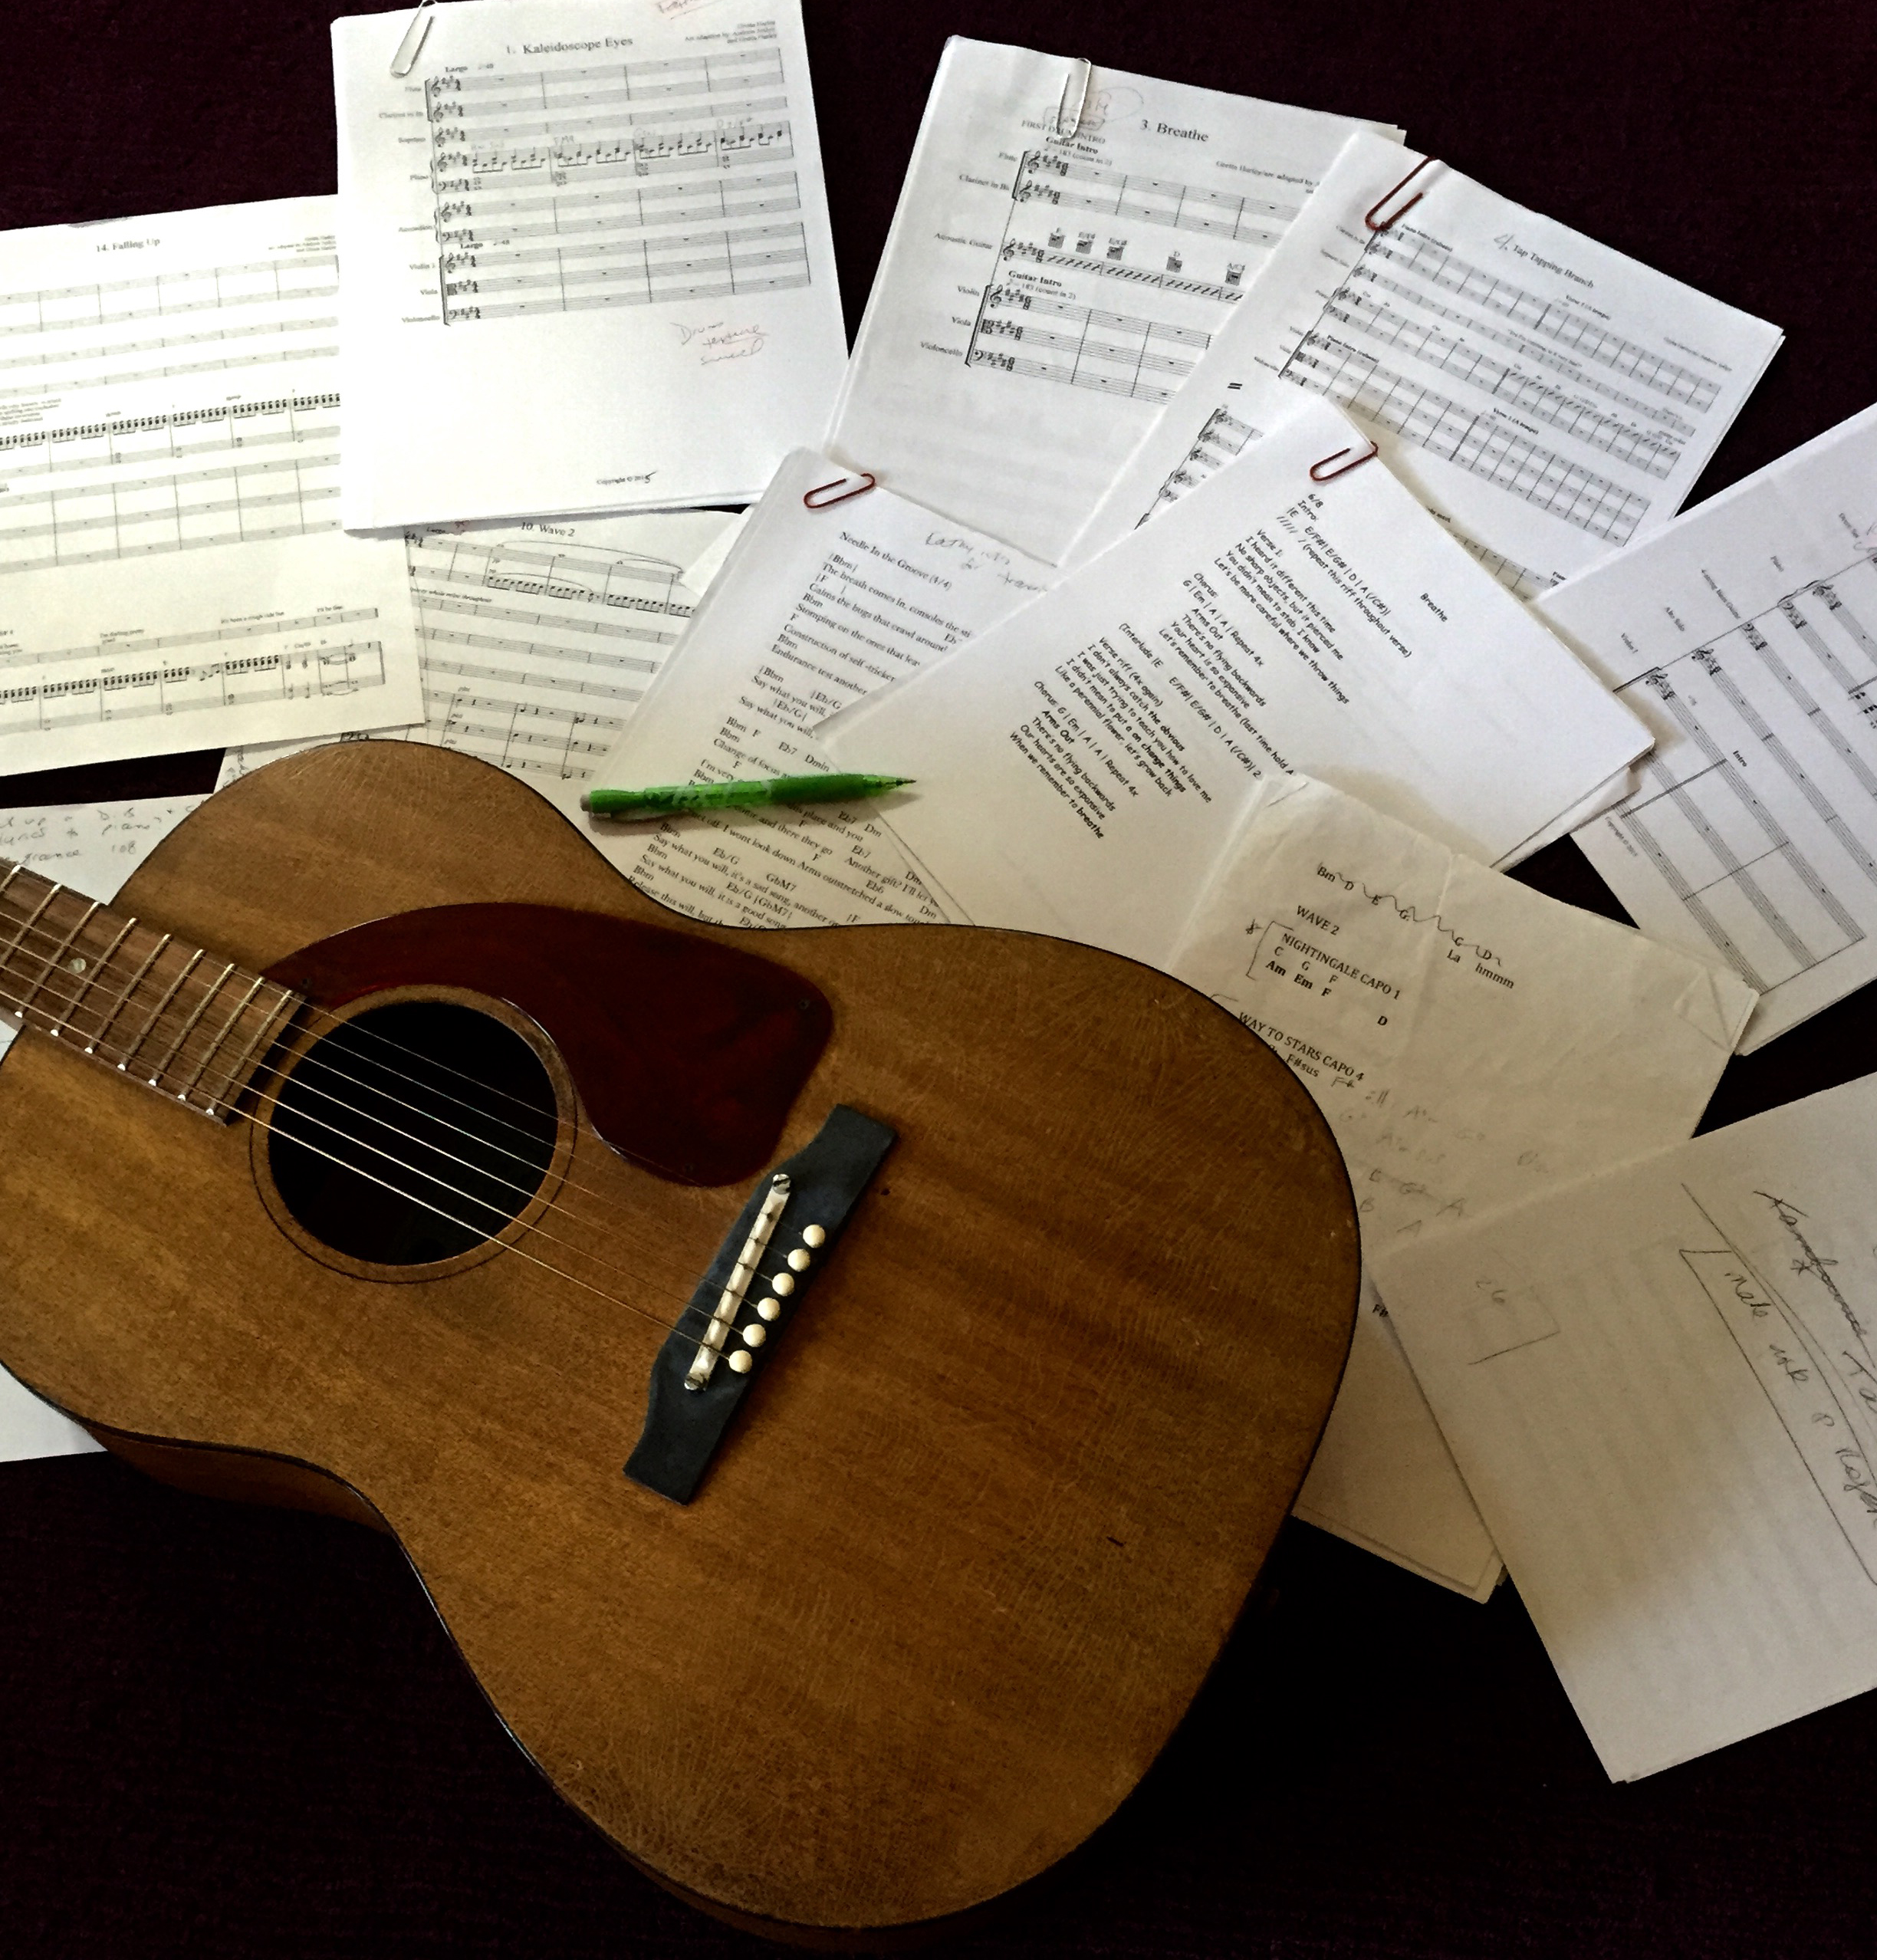 A guitar surrounded by a pile of leadsheets and scores